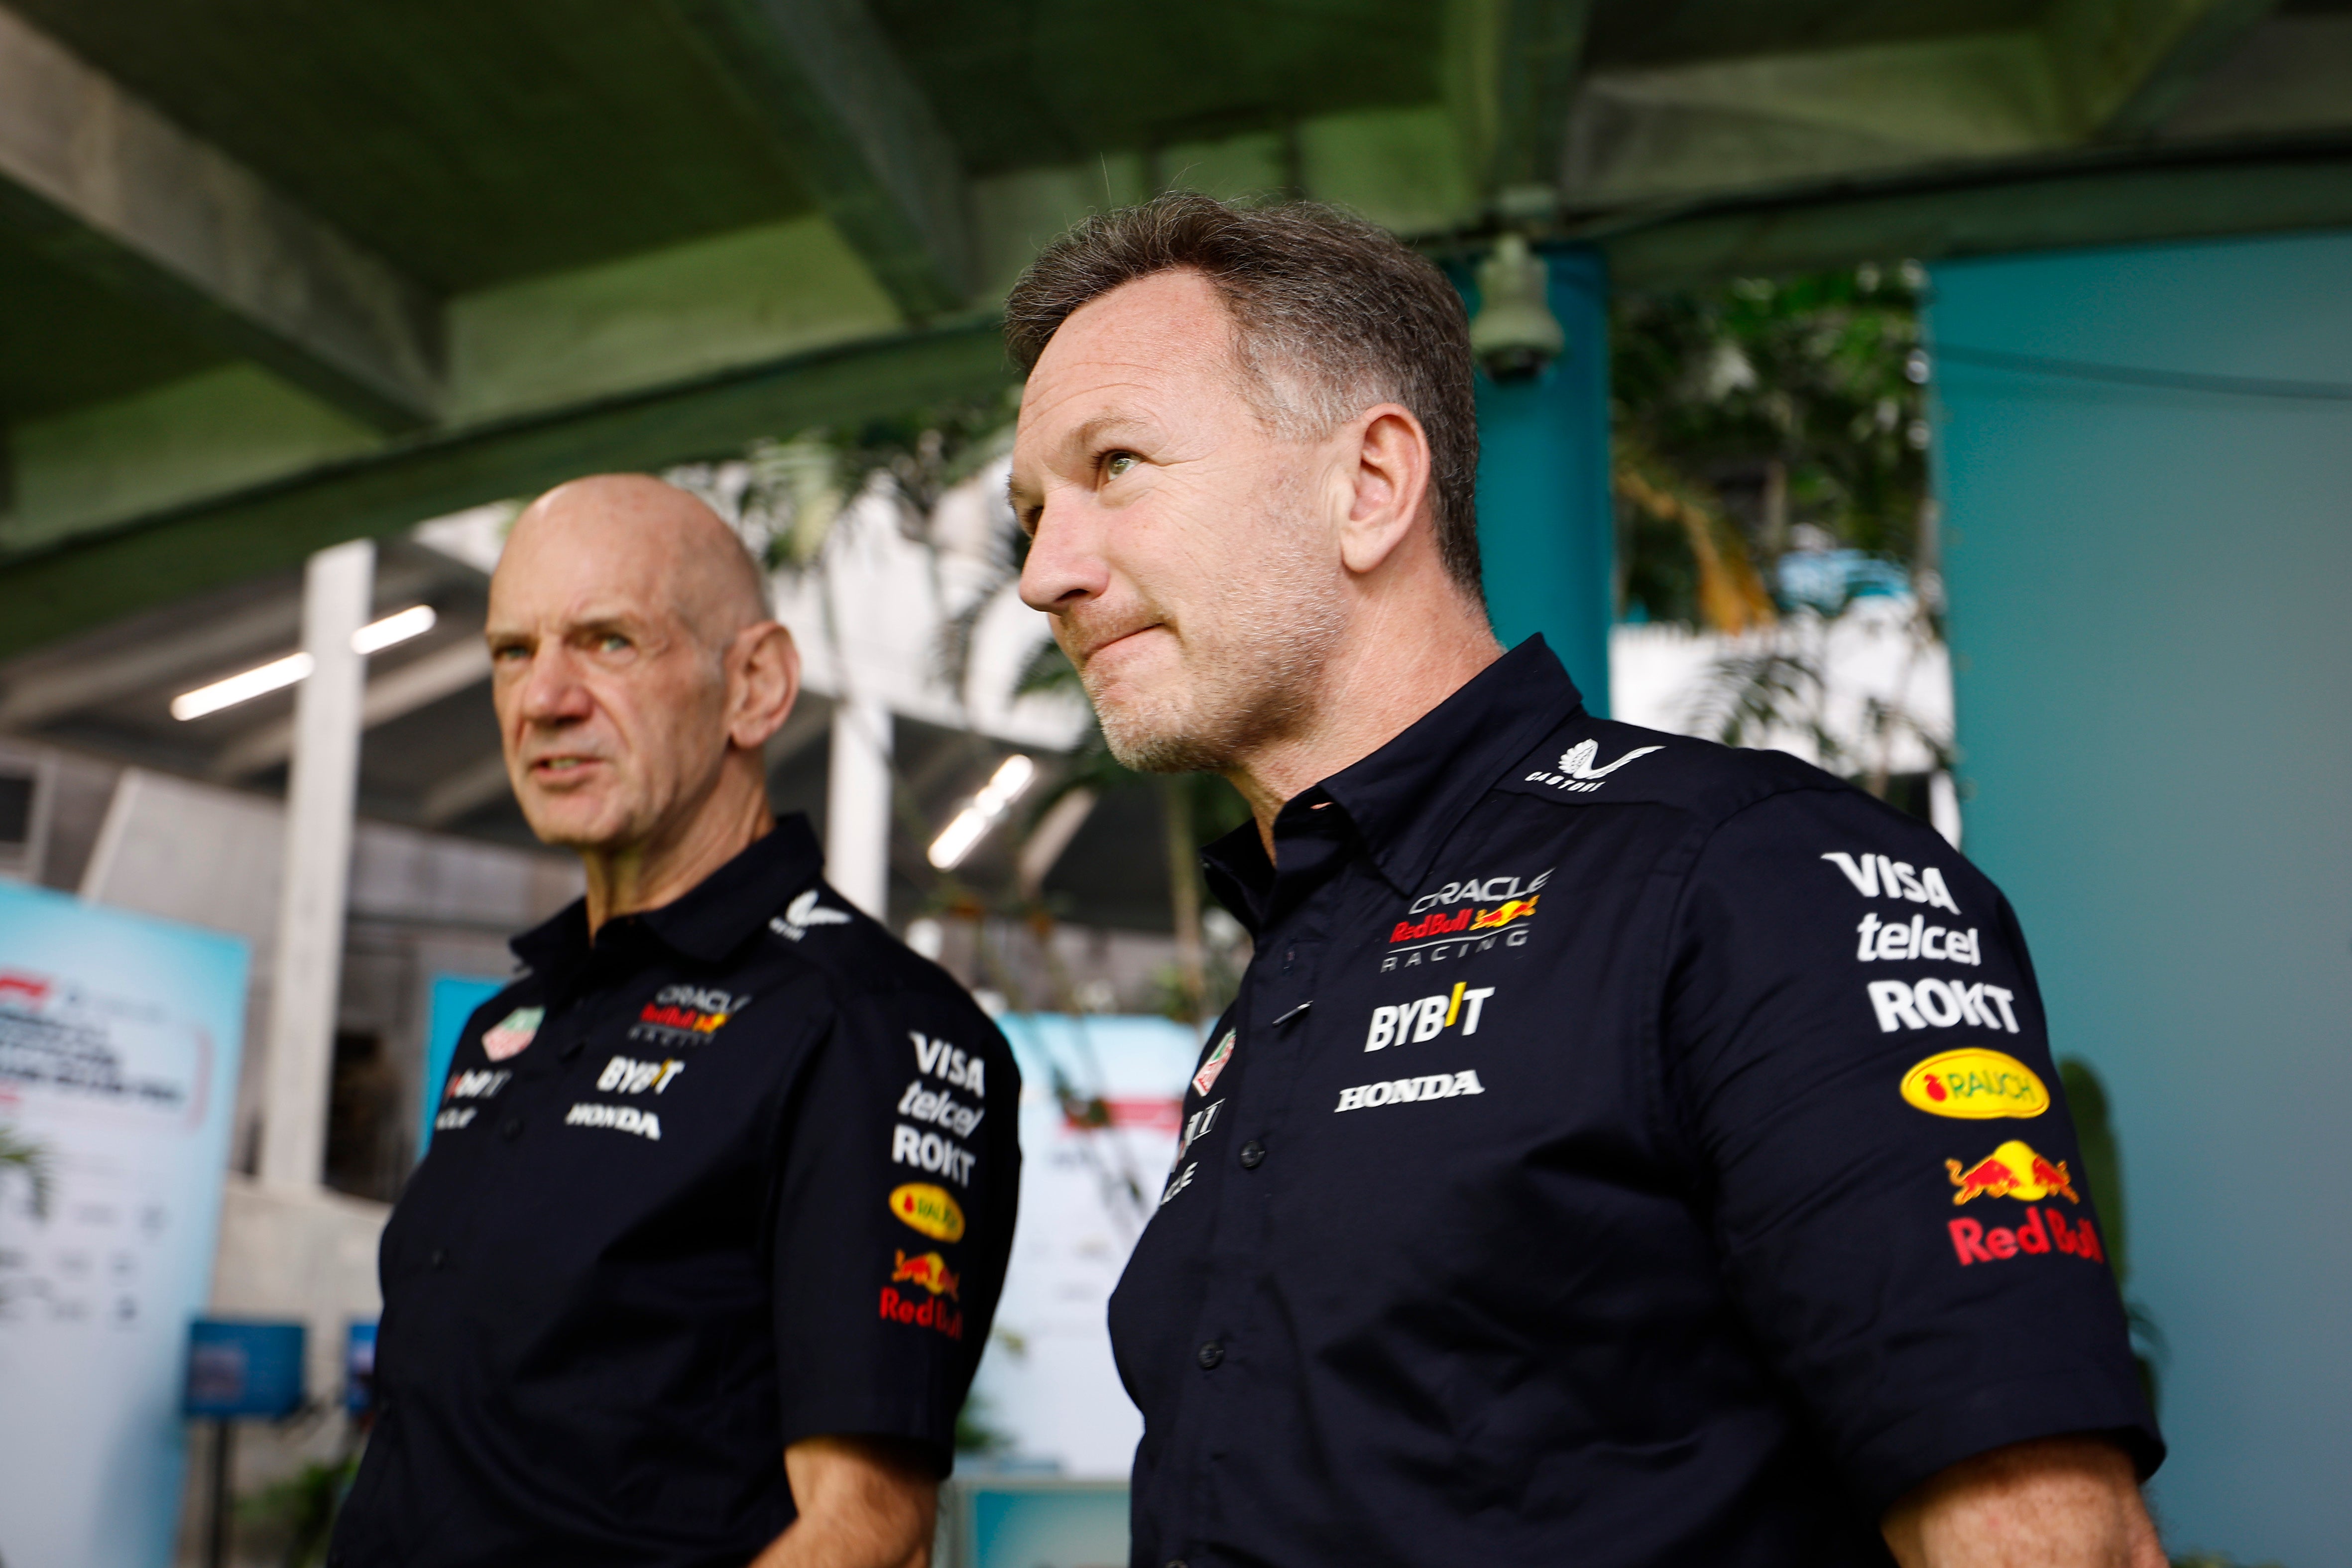 Christian Horner was pictured with Adrian Newey in Miami on Friday